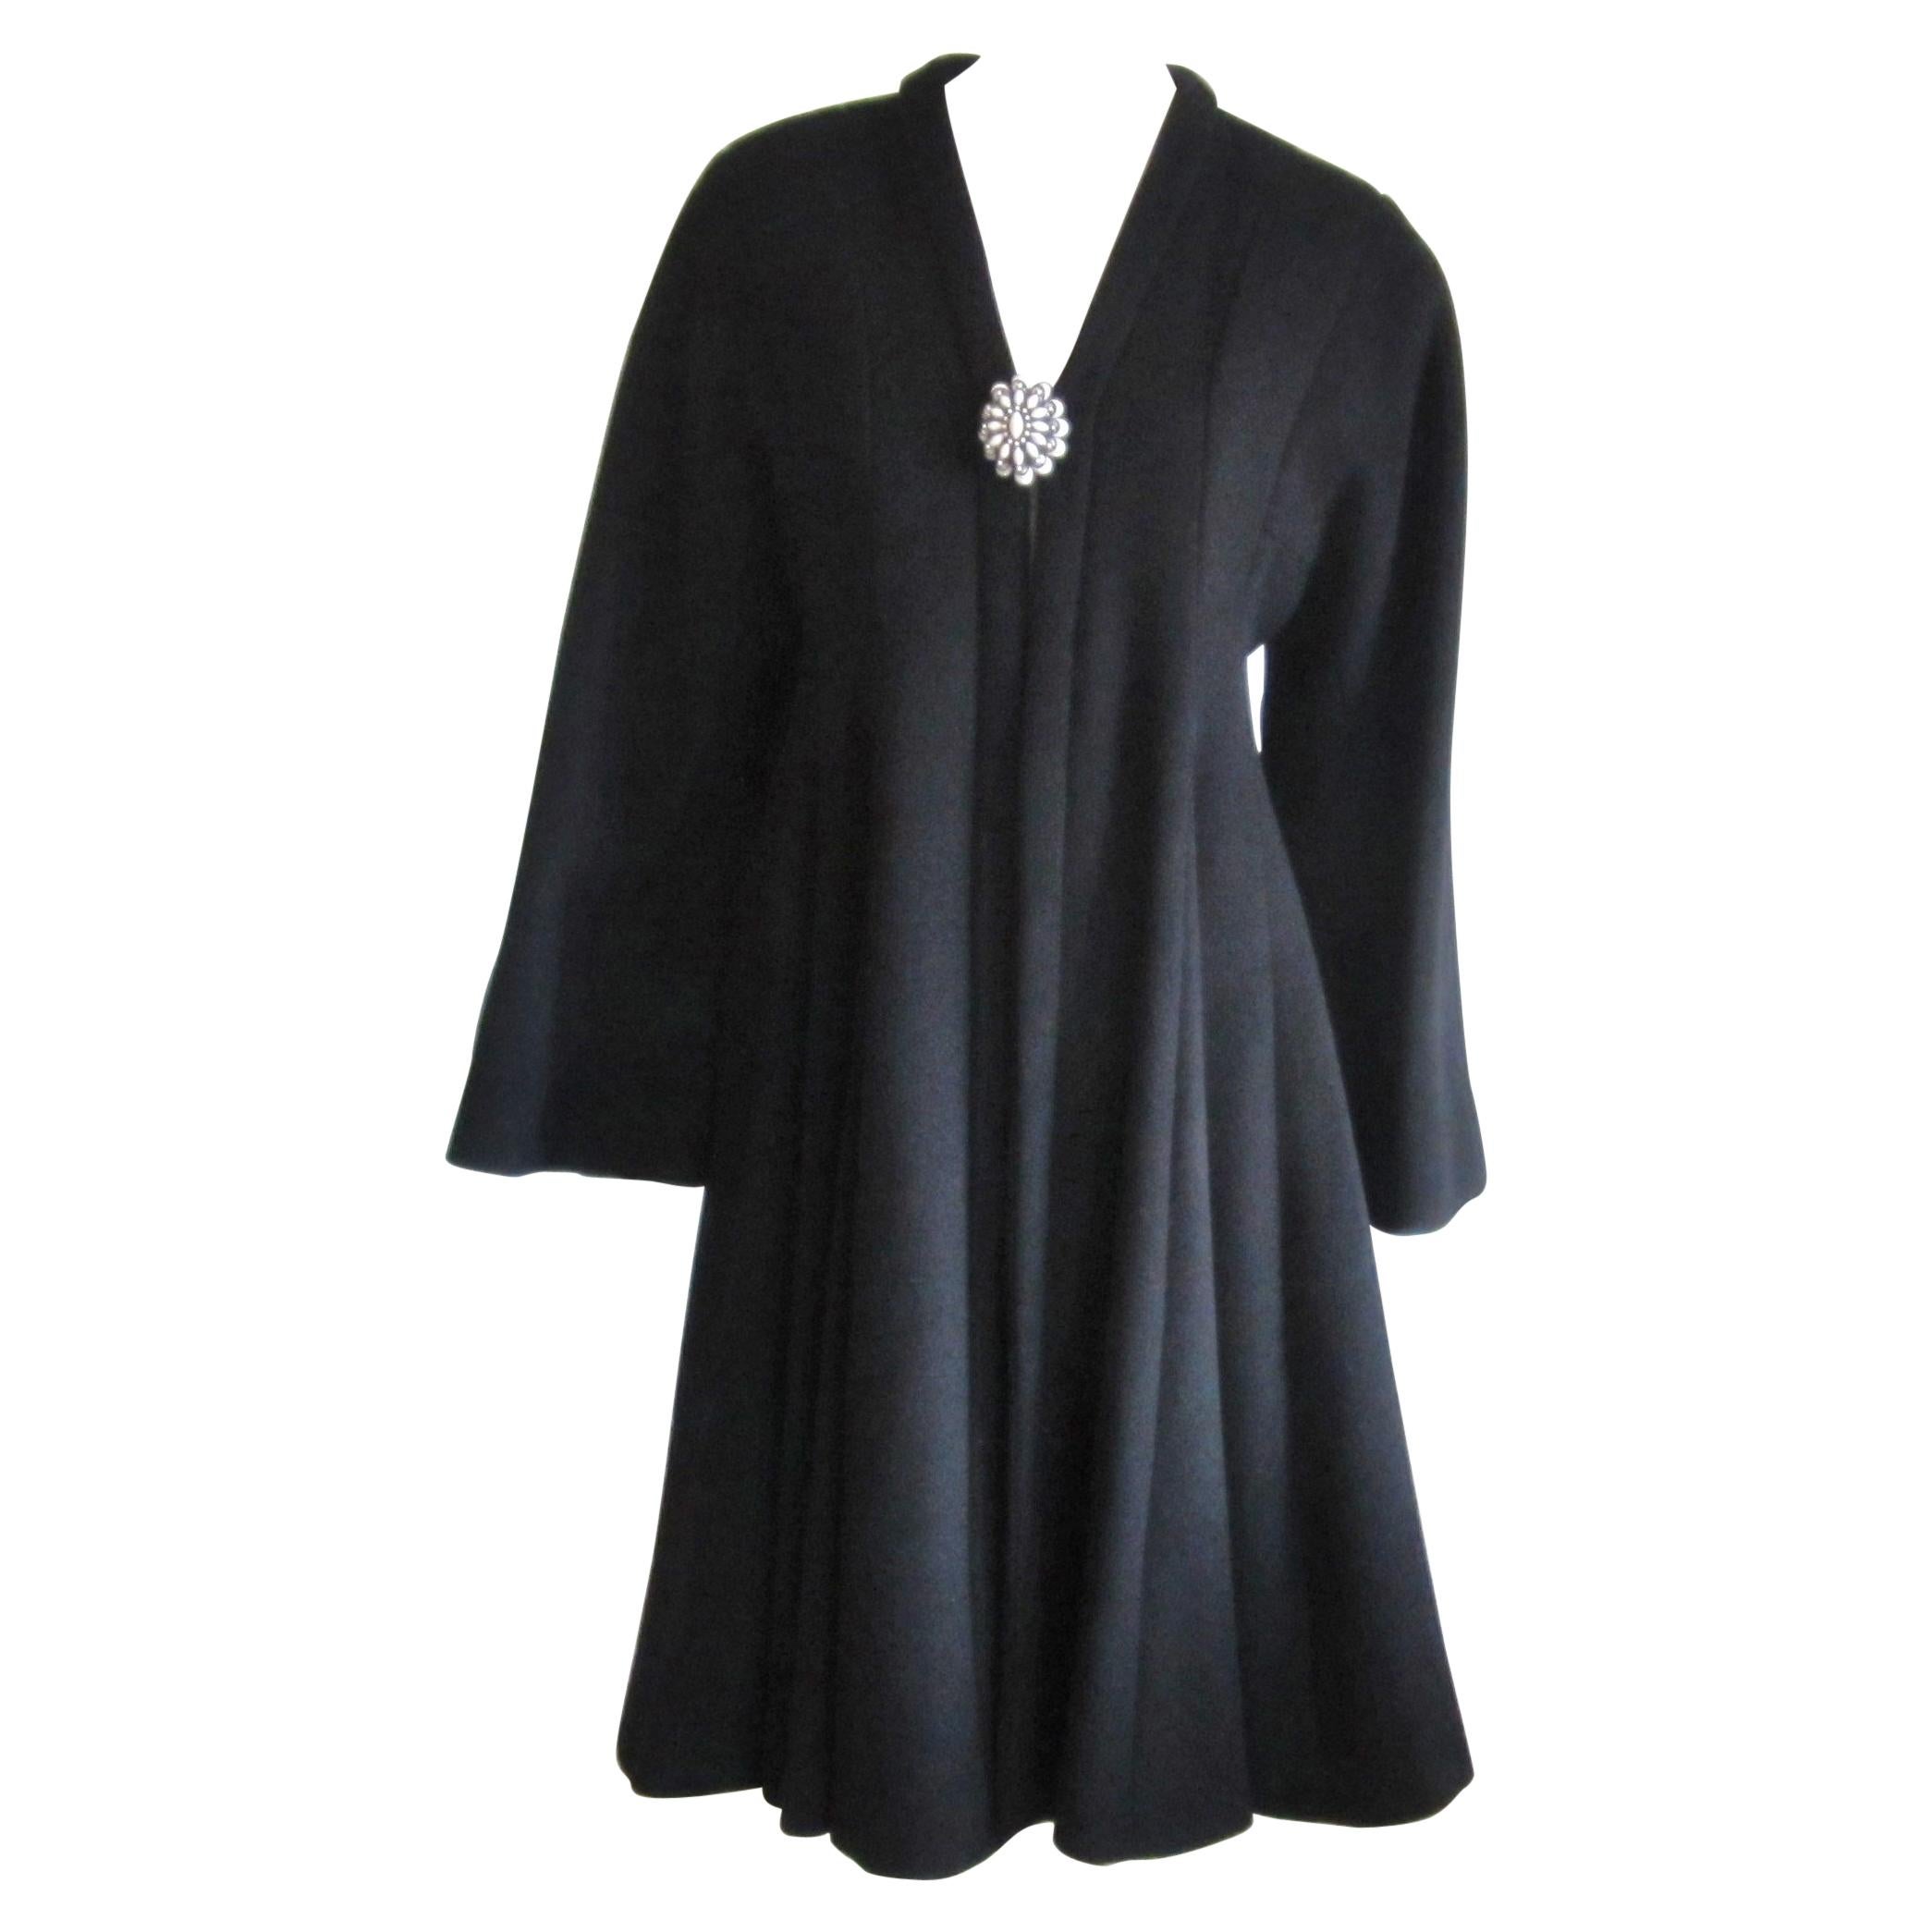 Christian Dior Black Coat Princess Cut Numbered Wool - Cashmere 38- Wide Sleeve